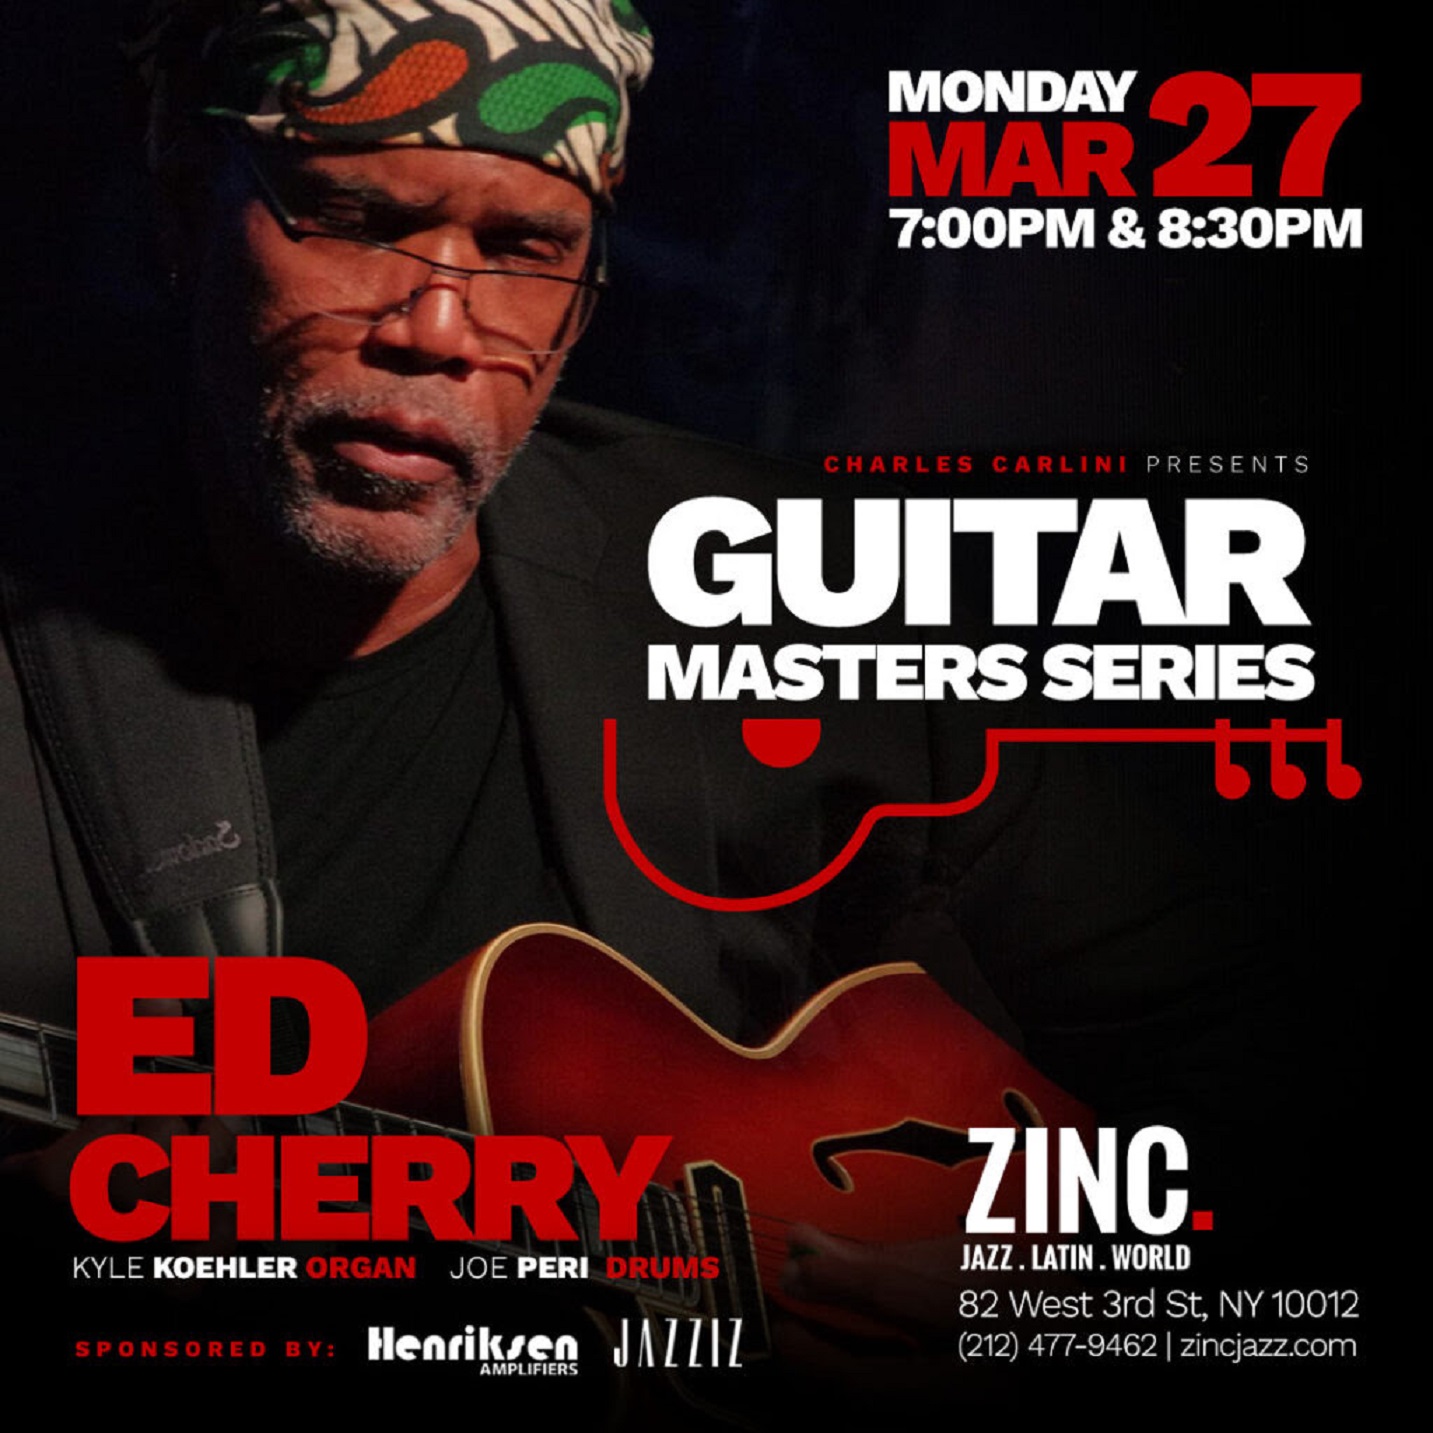 Acclaimed Jazz Guitarist Ed Cherry and his formidable trio perform at Zinc on Monday, March 27